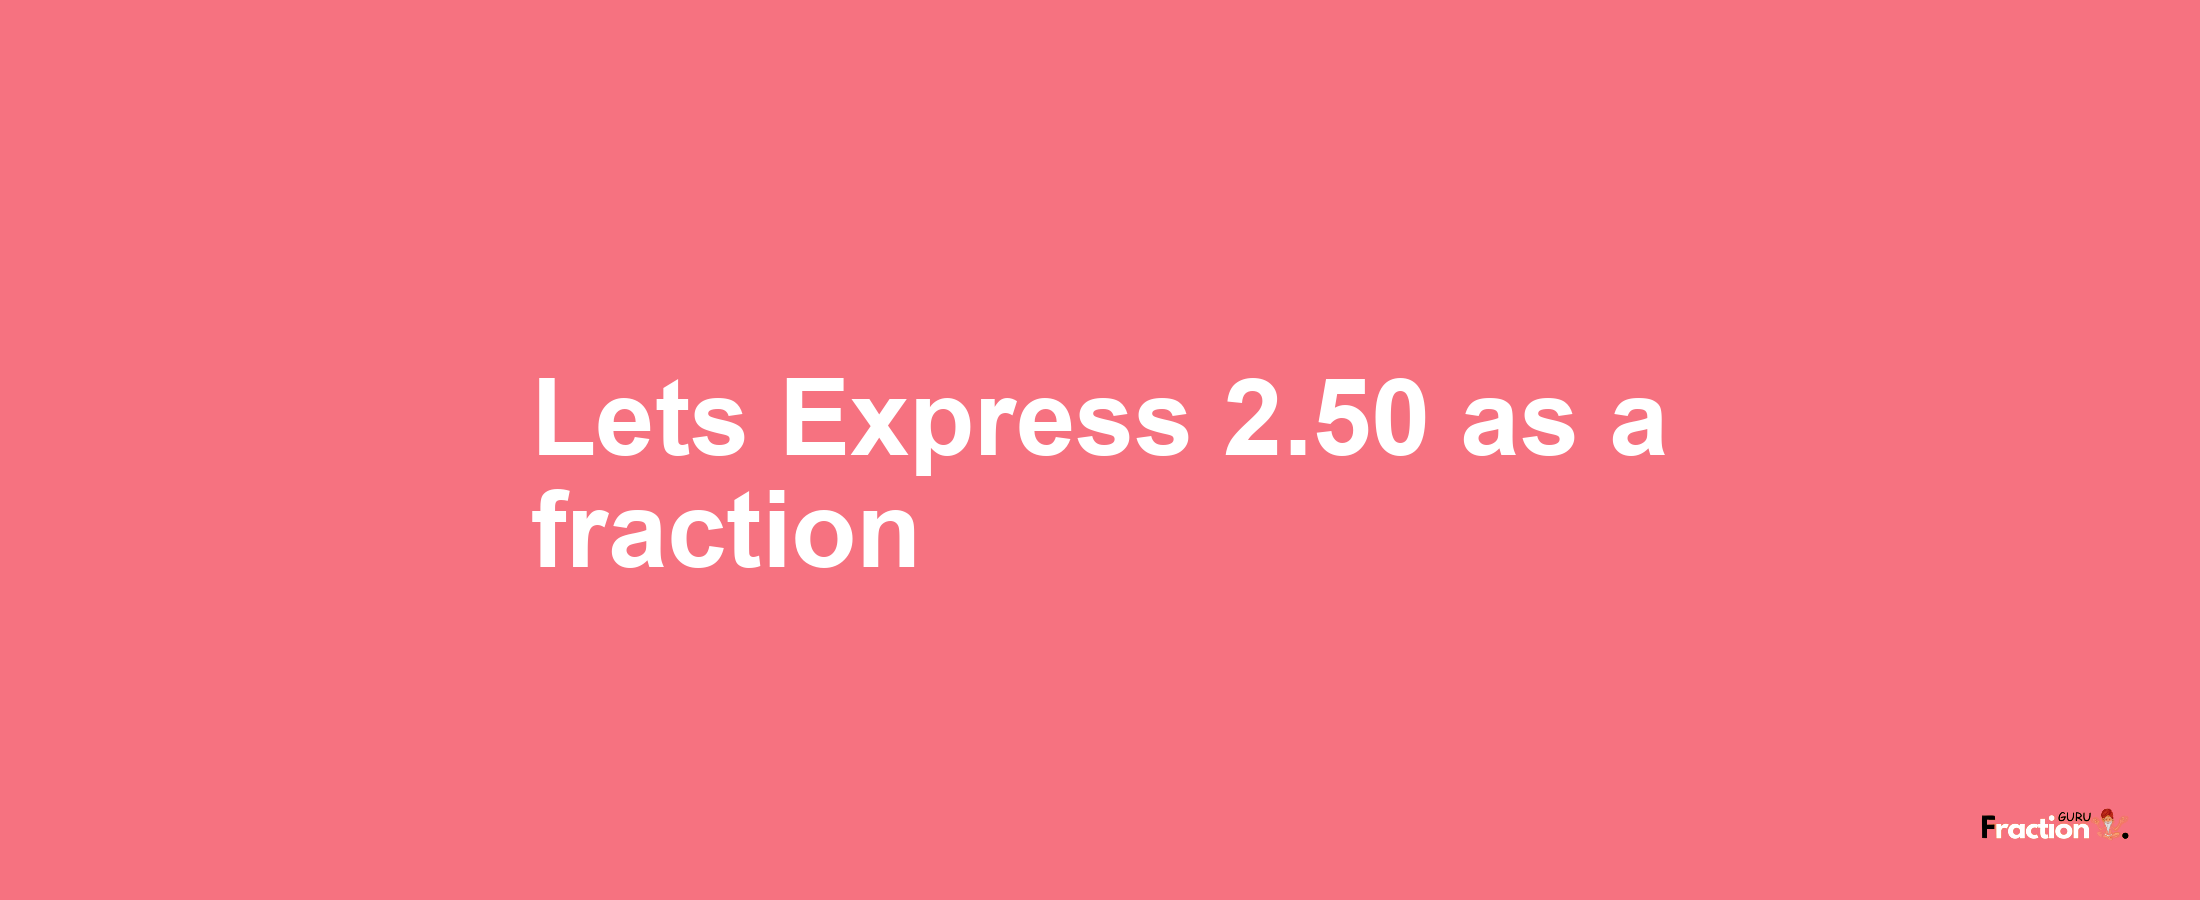 Lets Express 2.50 as afraction